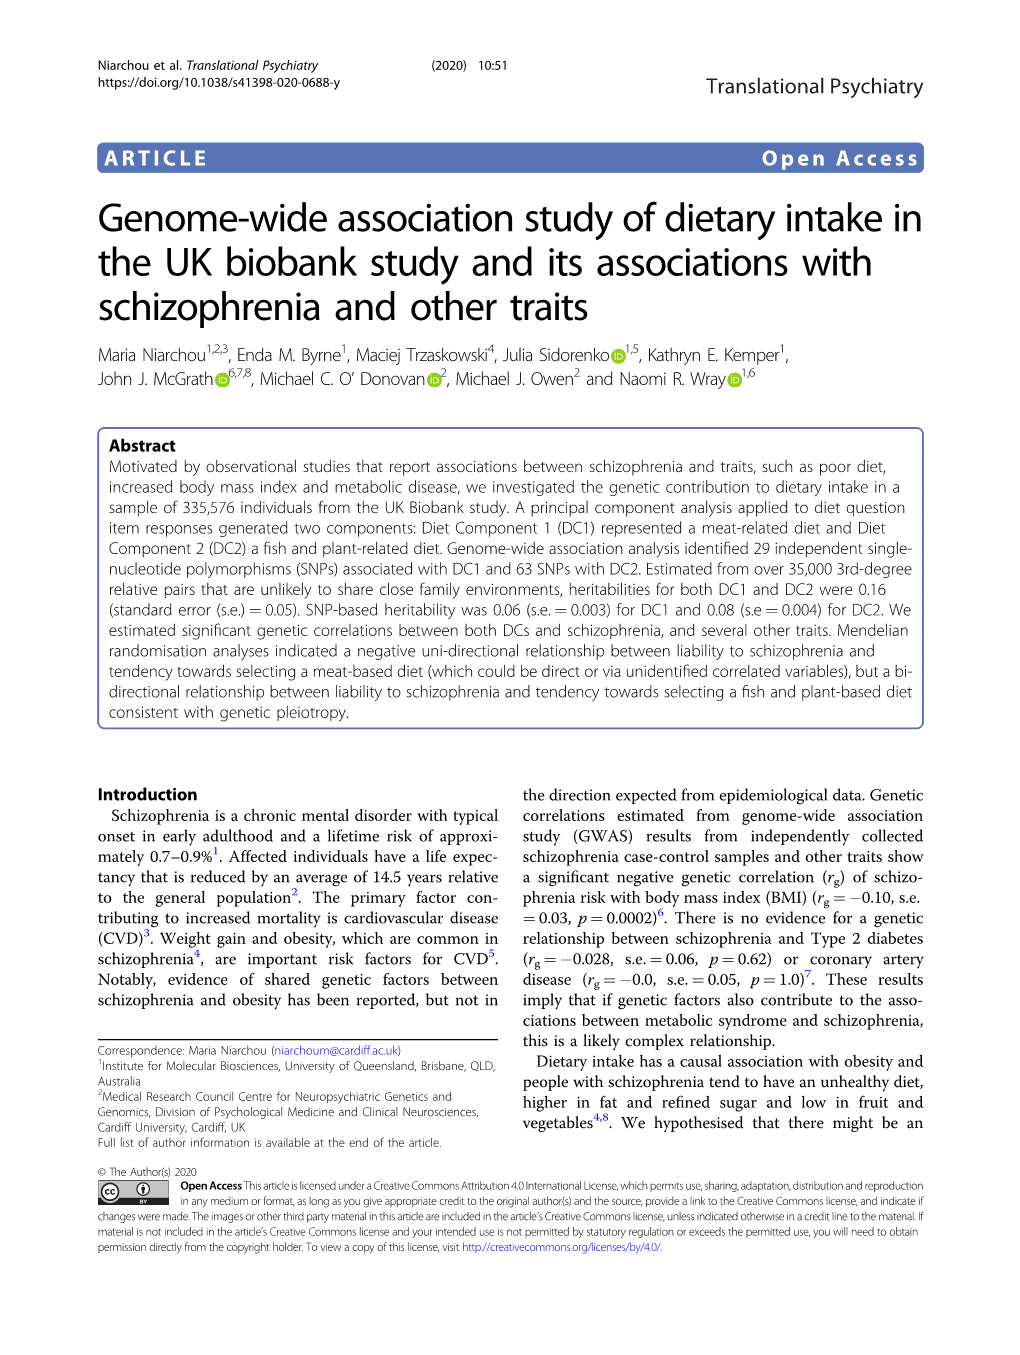 Genome-Wide Association Study of Dietary Intake in the UK Biobank Study and Its Associations with Schizophrenia and Other Traits Maria Niarchou1,2,3, Enda M